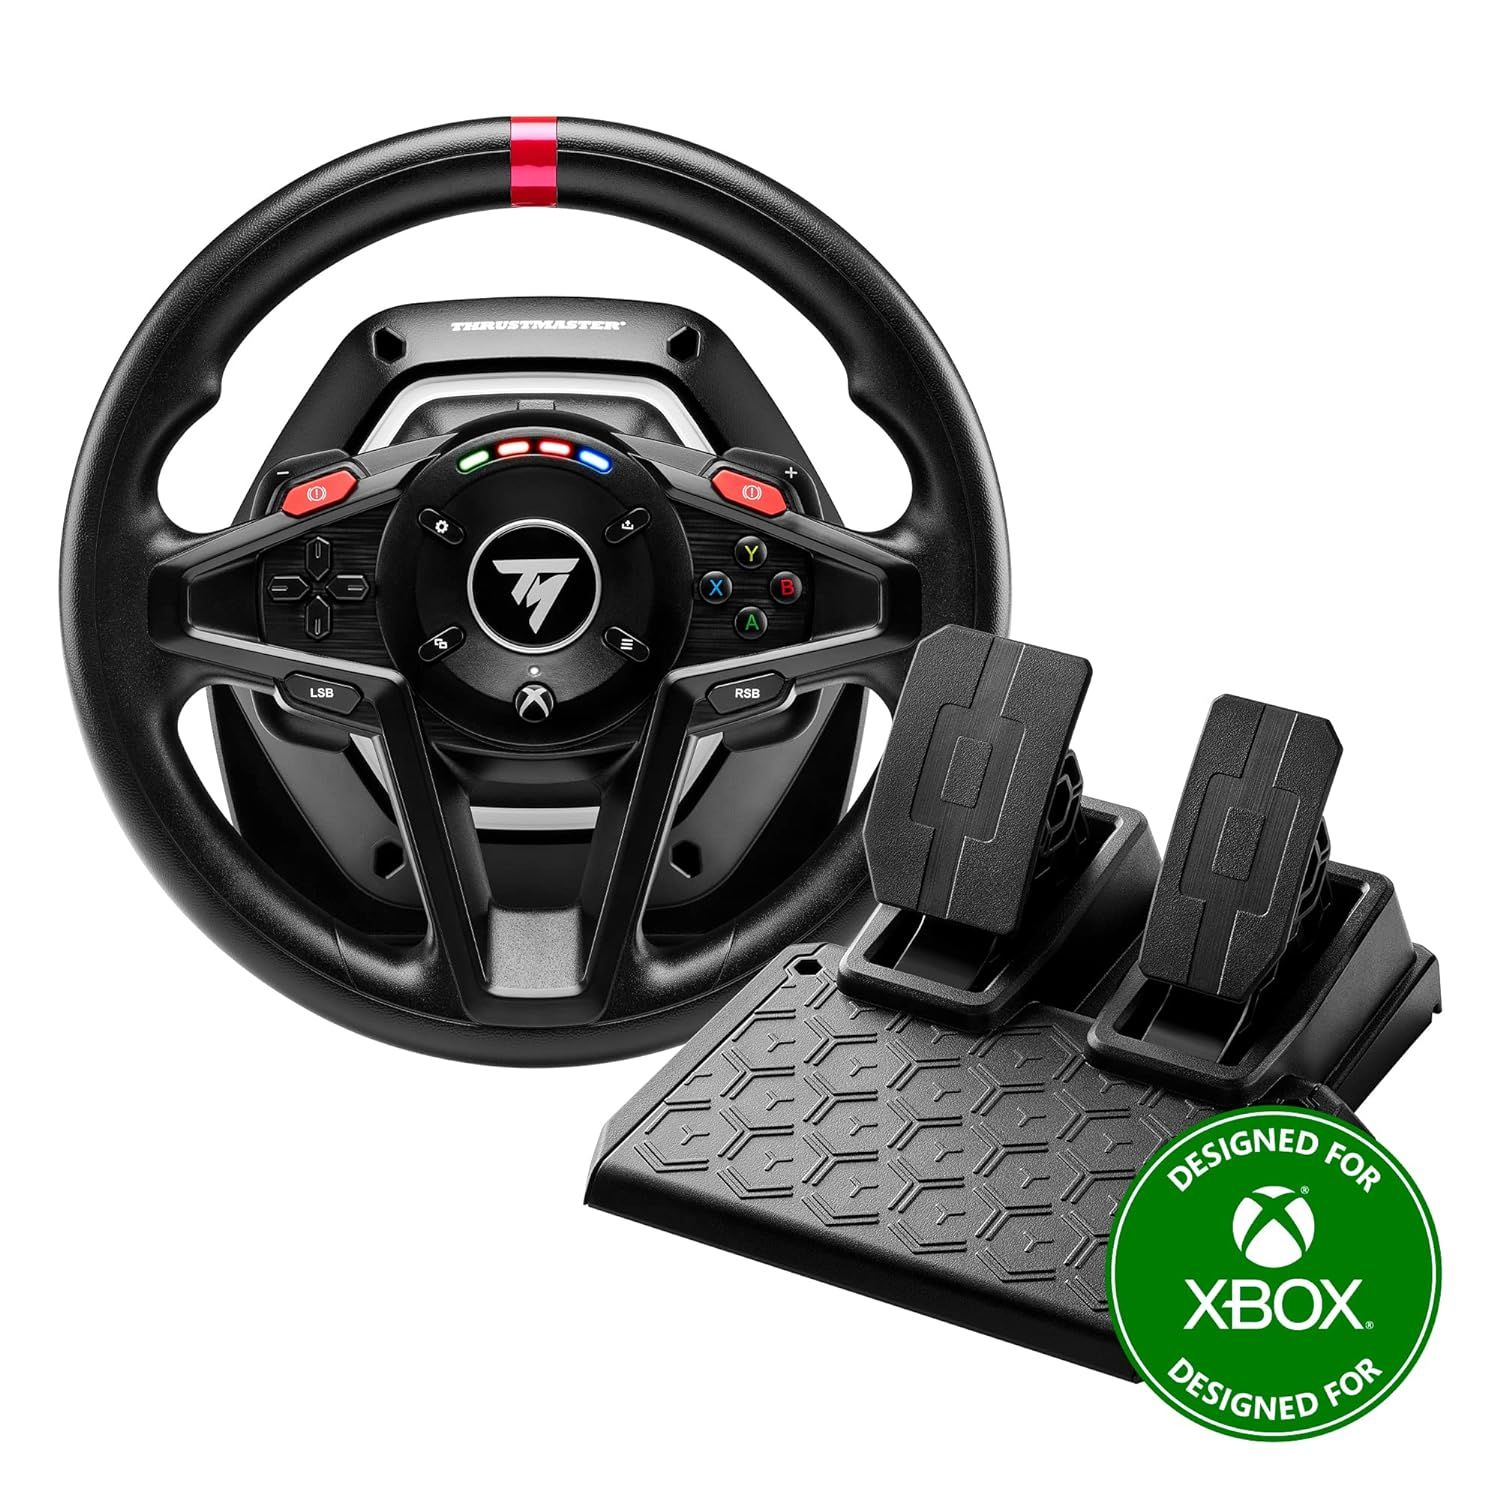 The Best Xbox Steering Wheels for Racing Games